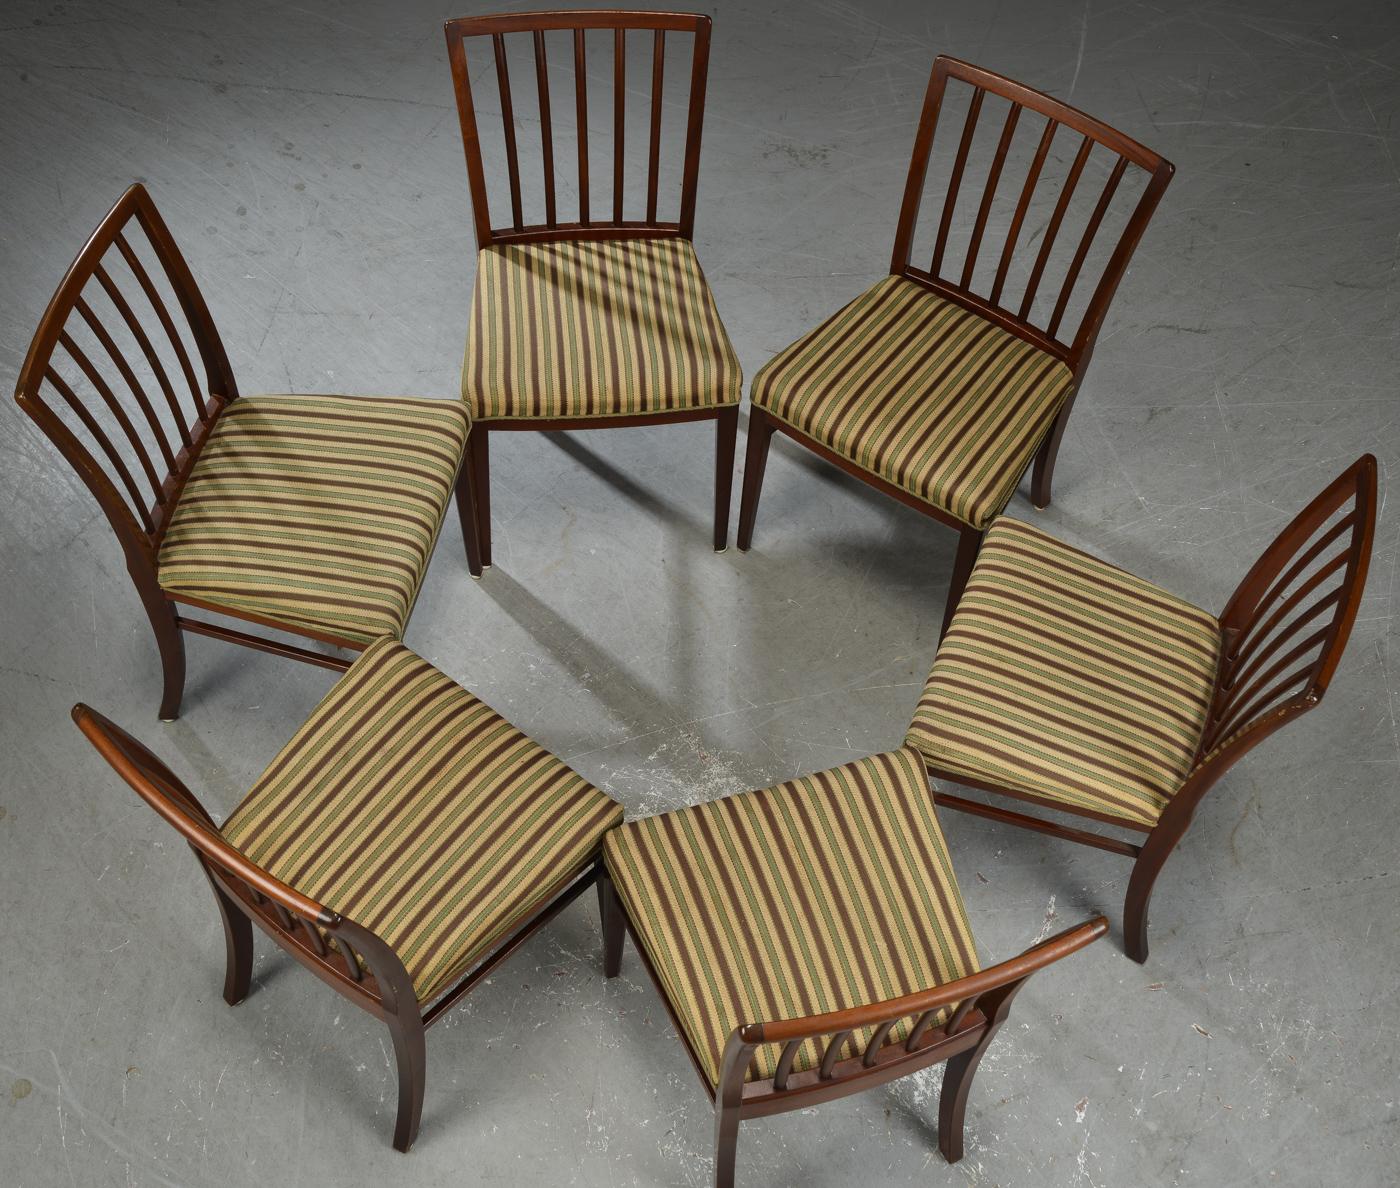 Set of six Danish modern dining or side chairs with mahogany frames. Elegant and comfortable curved and slatted backs. Seats upholstered in striped beige, brown and green wool.